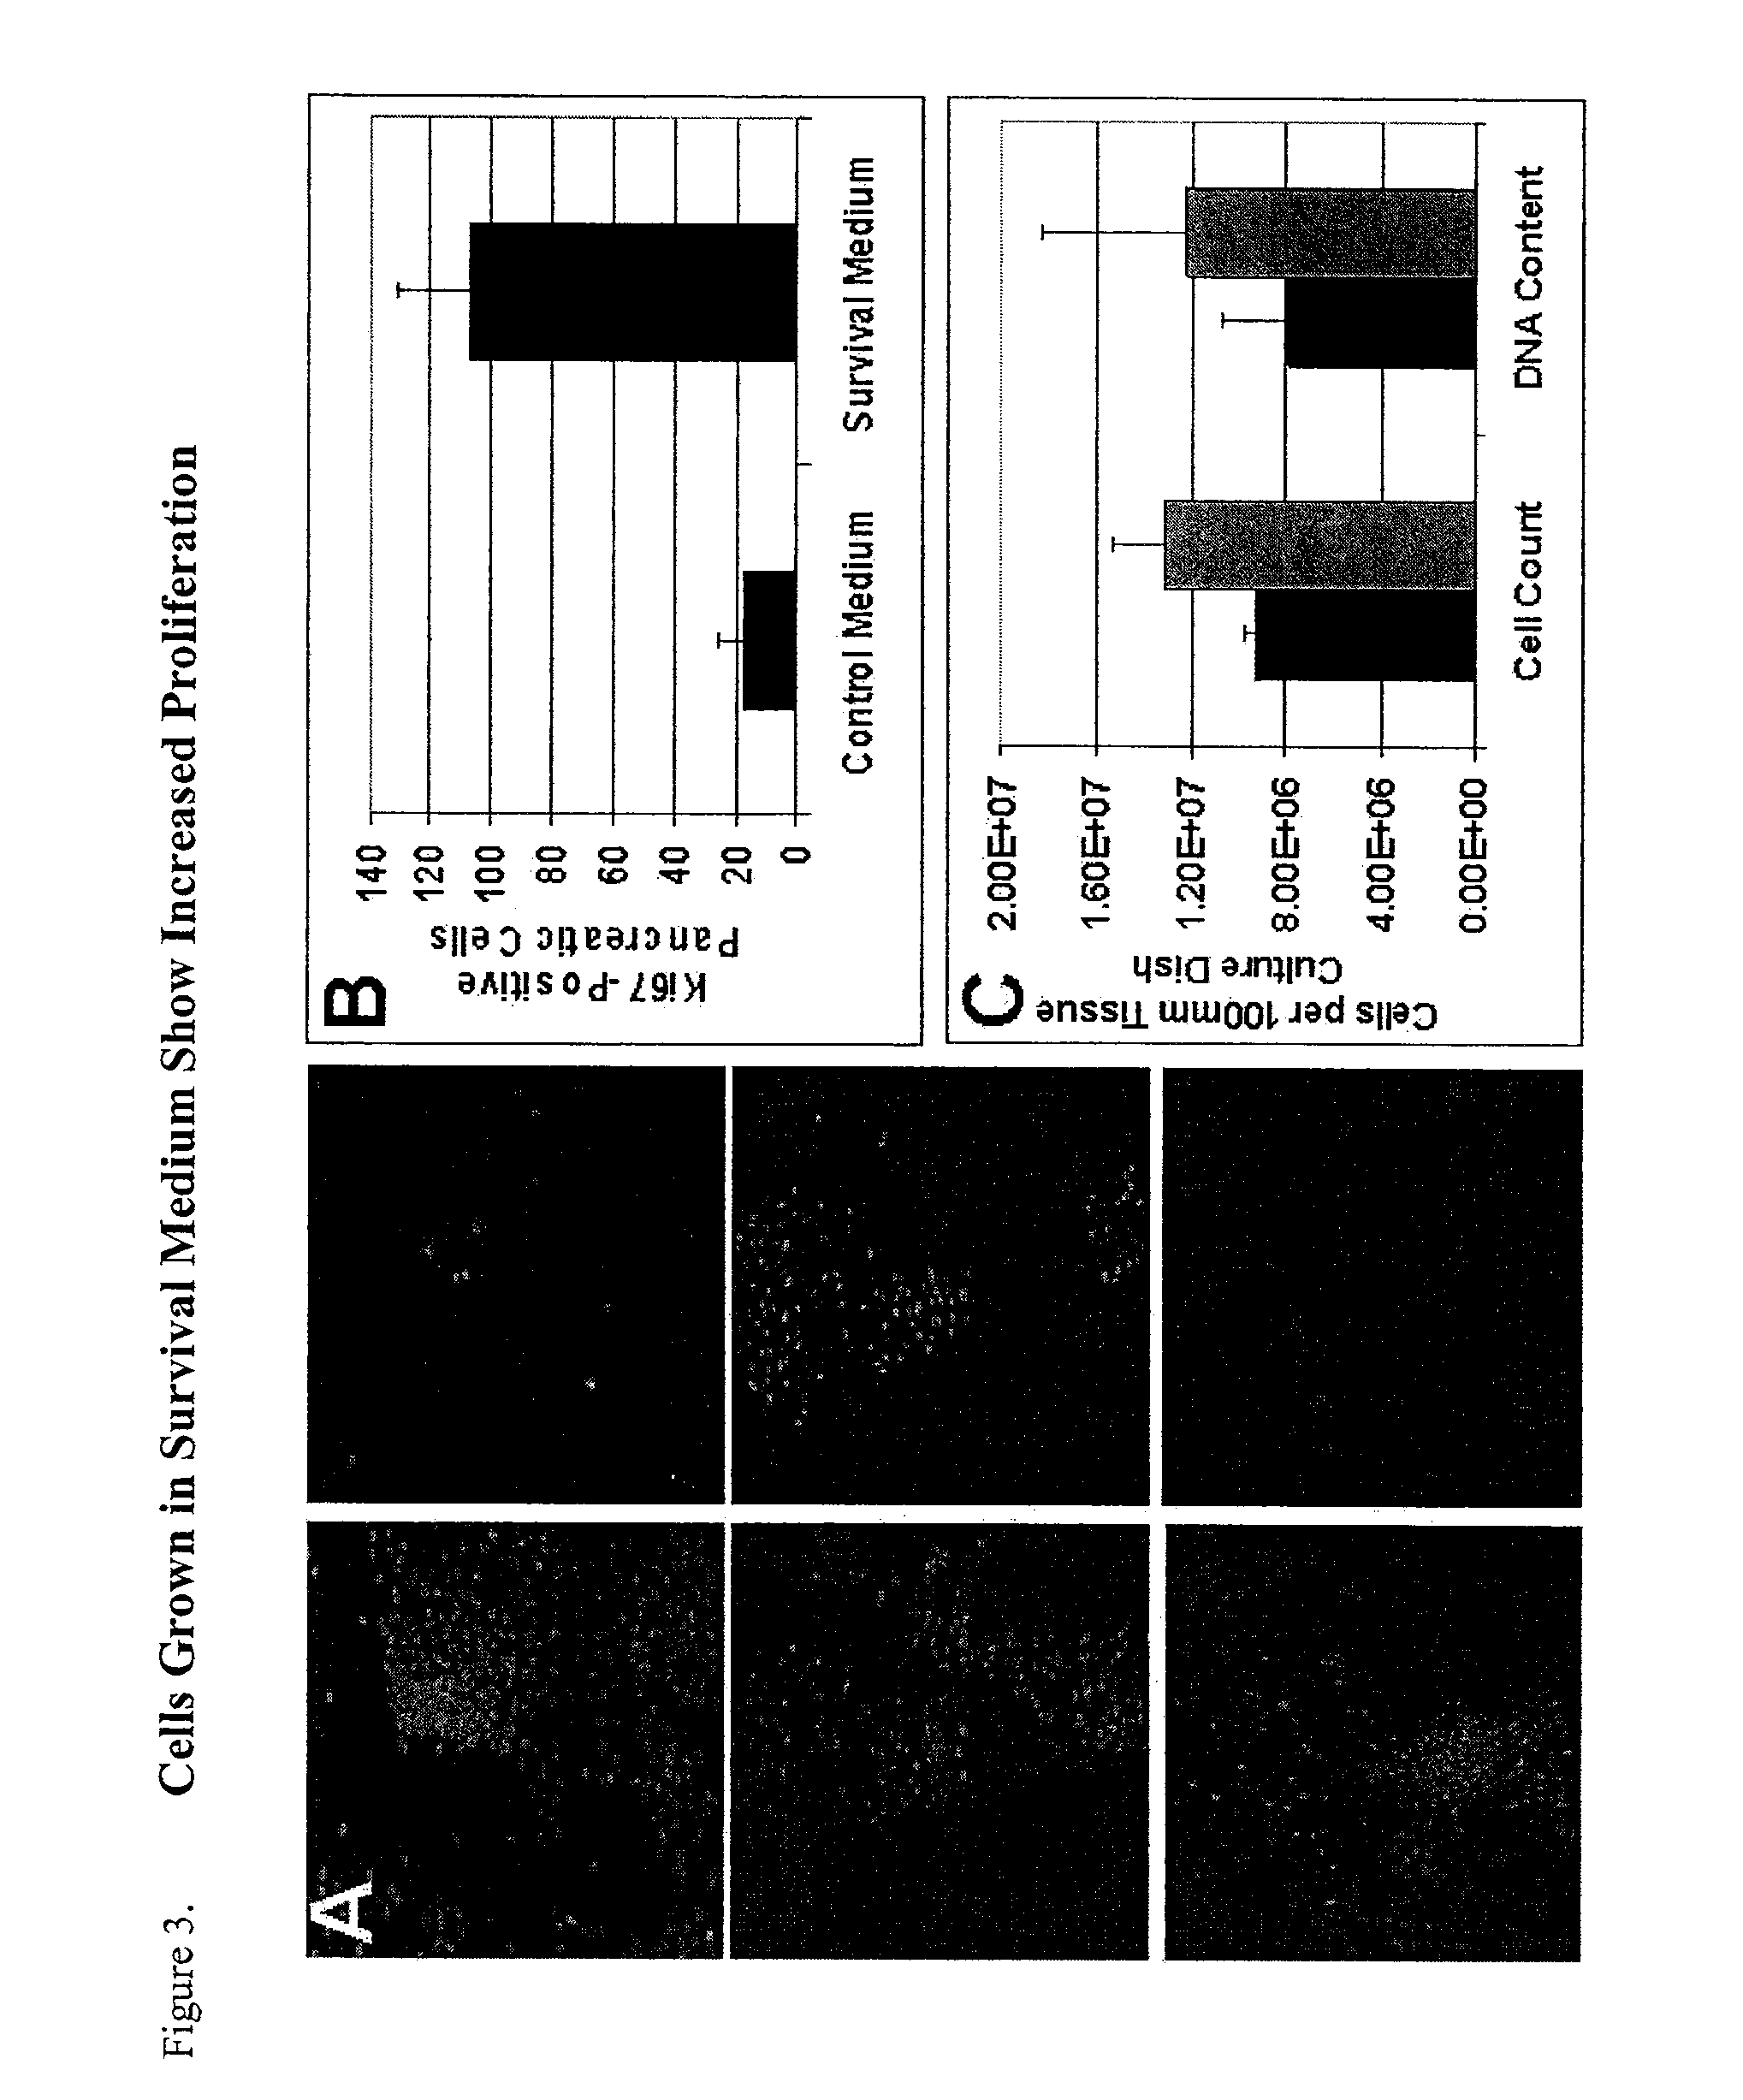 Method of improving cell proliferation of pancreatic progenitor cells in a pancreatic cell culture